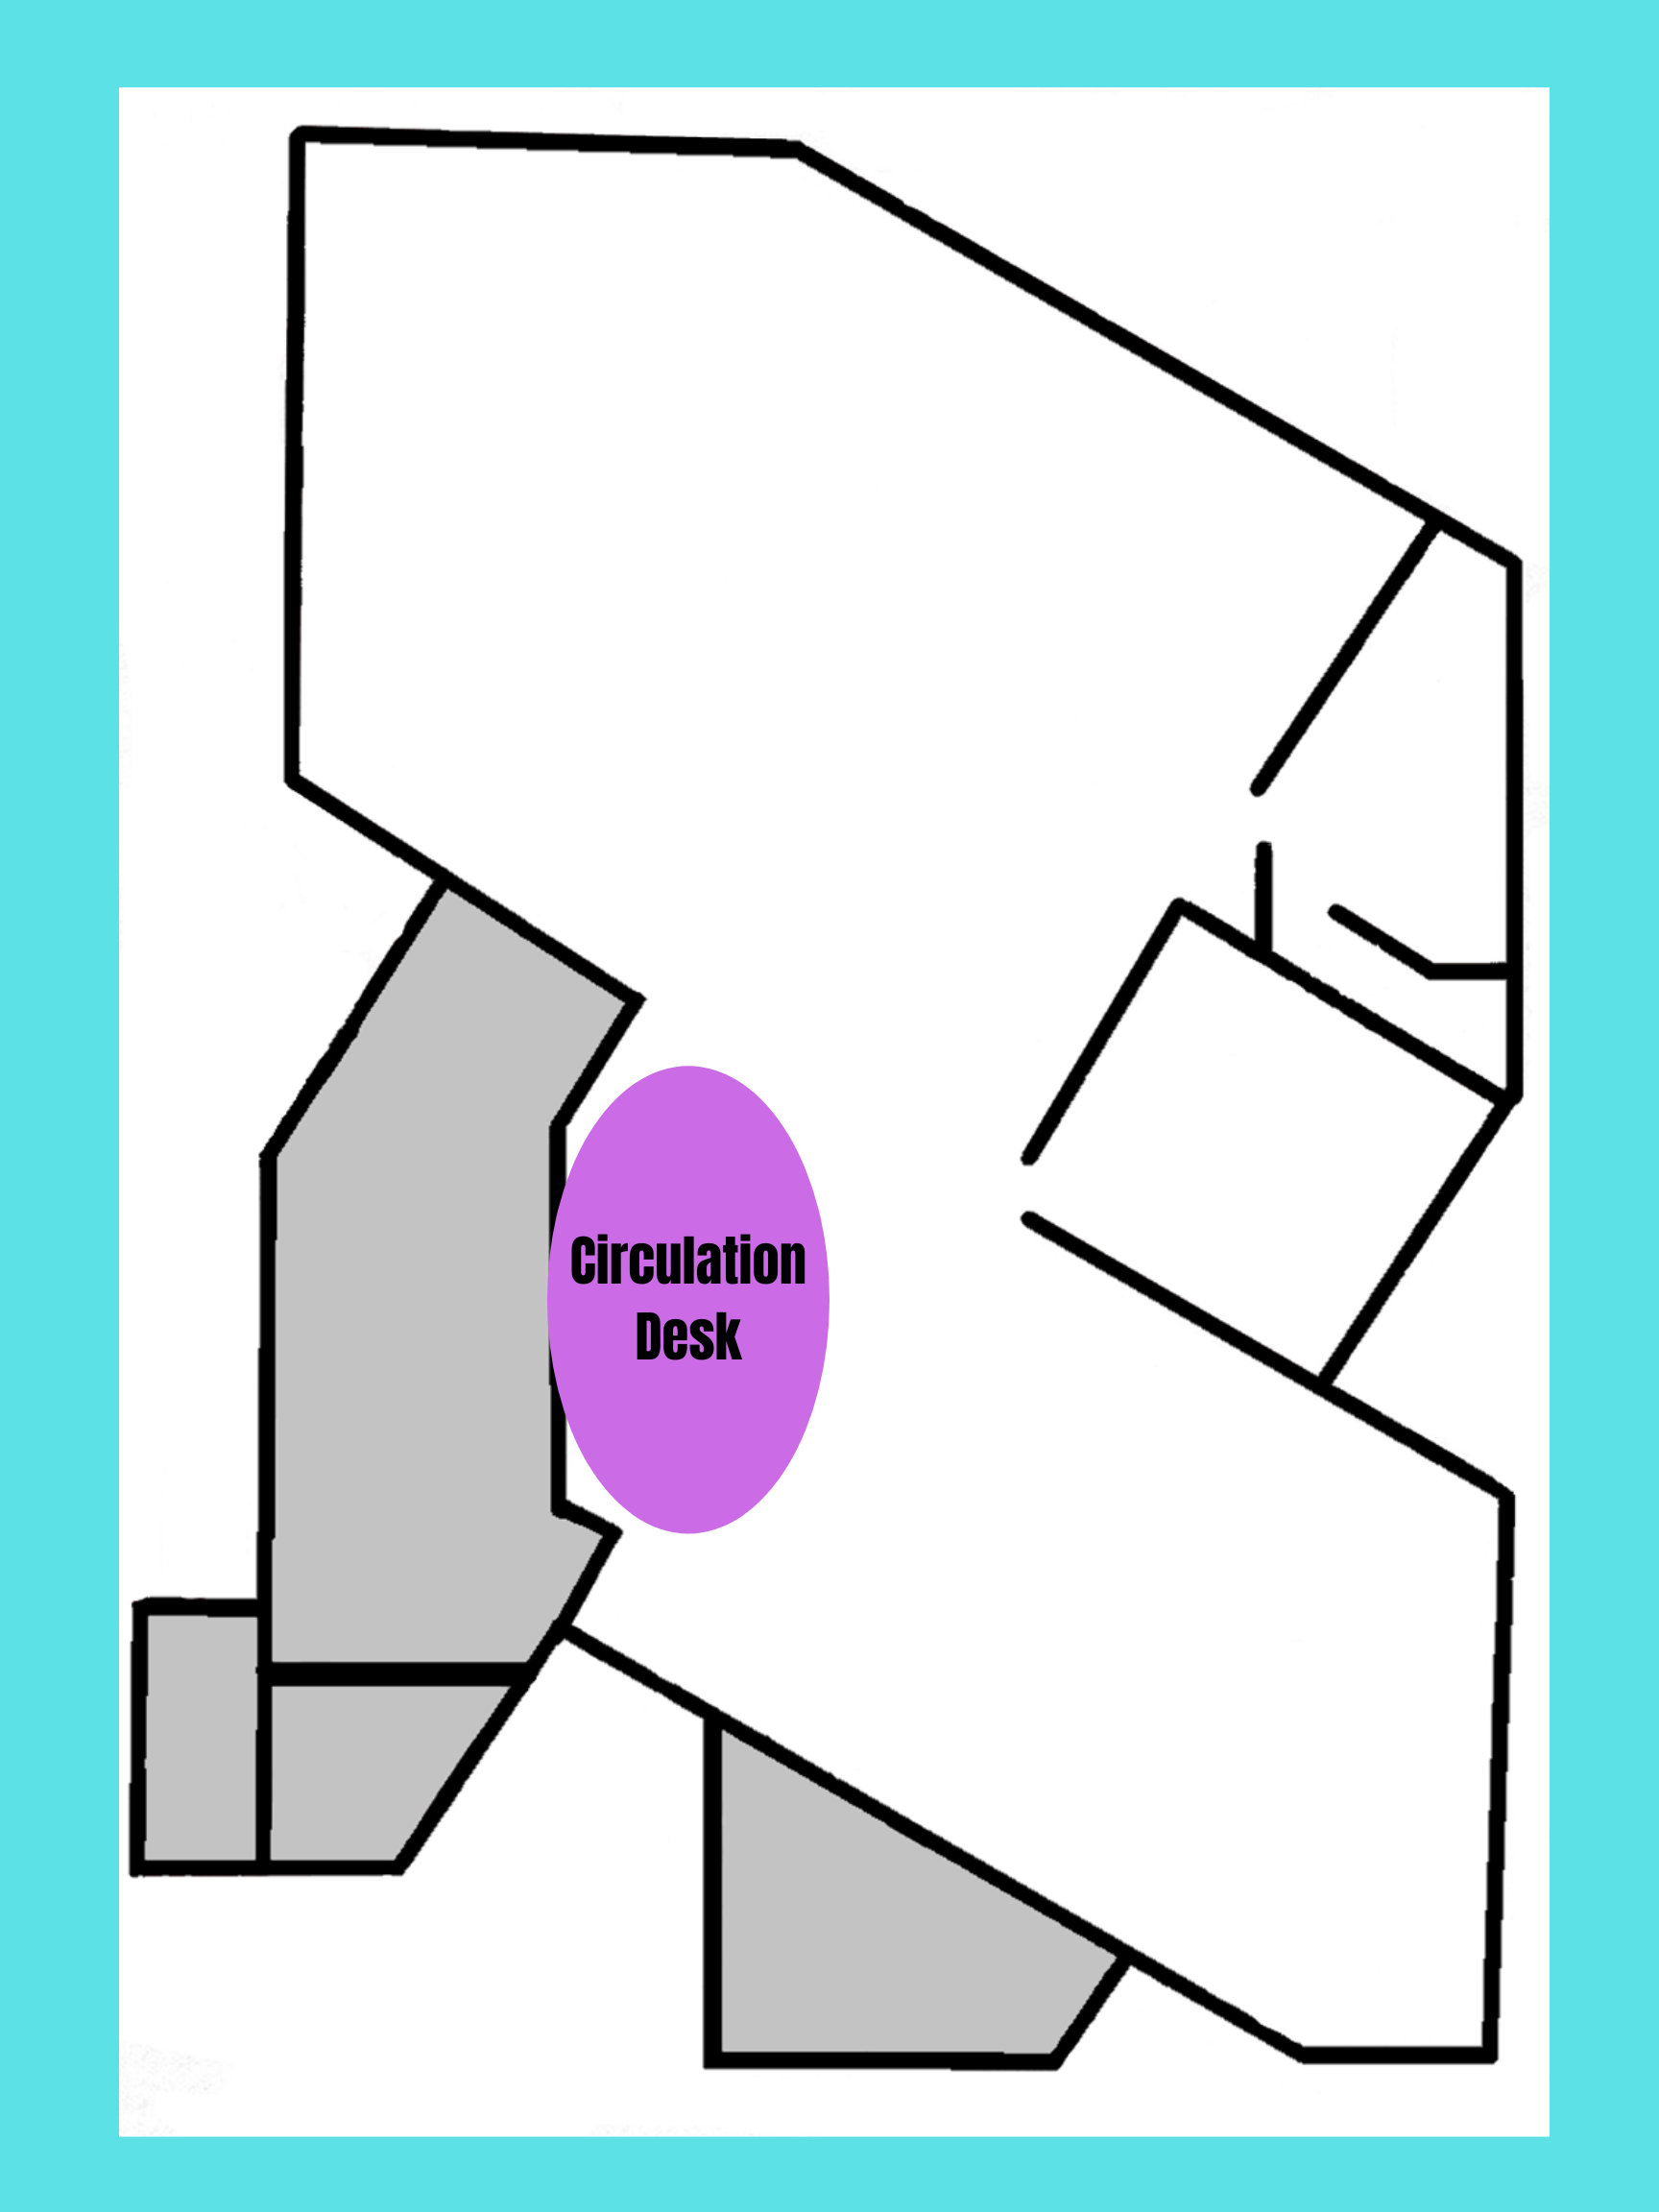 Map of floor plan of Troke Branch Library, with big purple oval indicating circulation desk location.